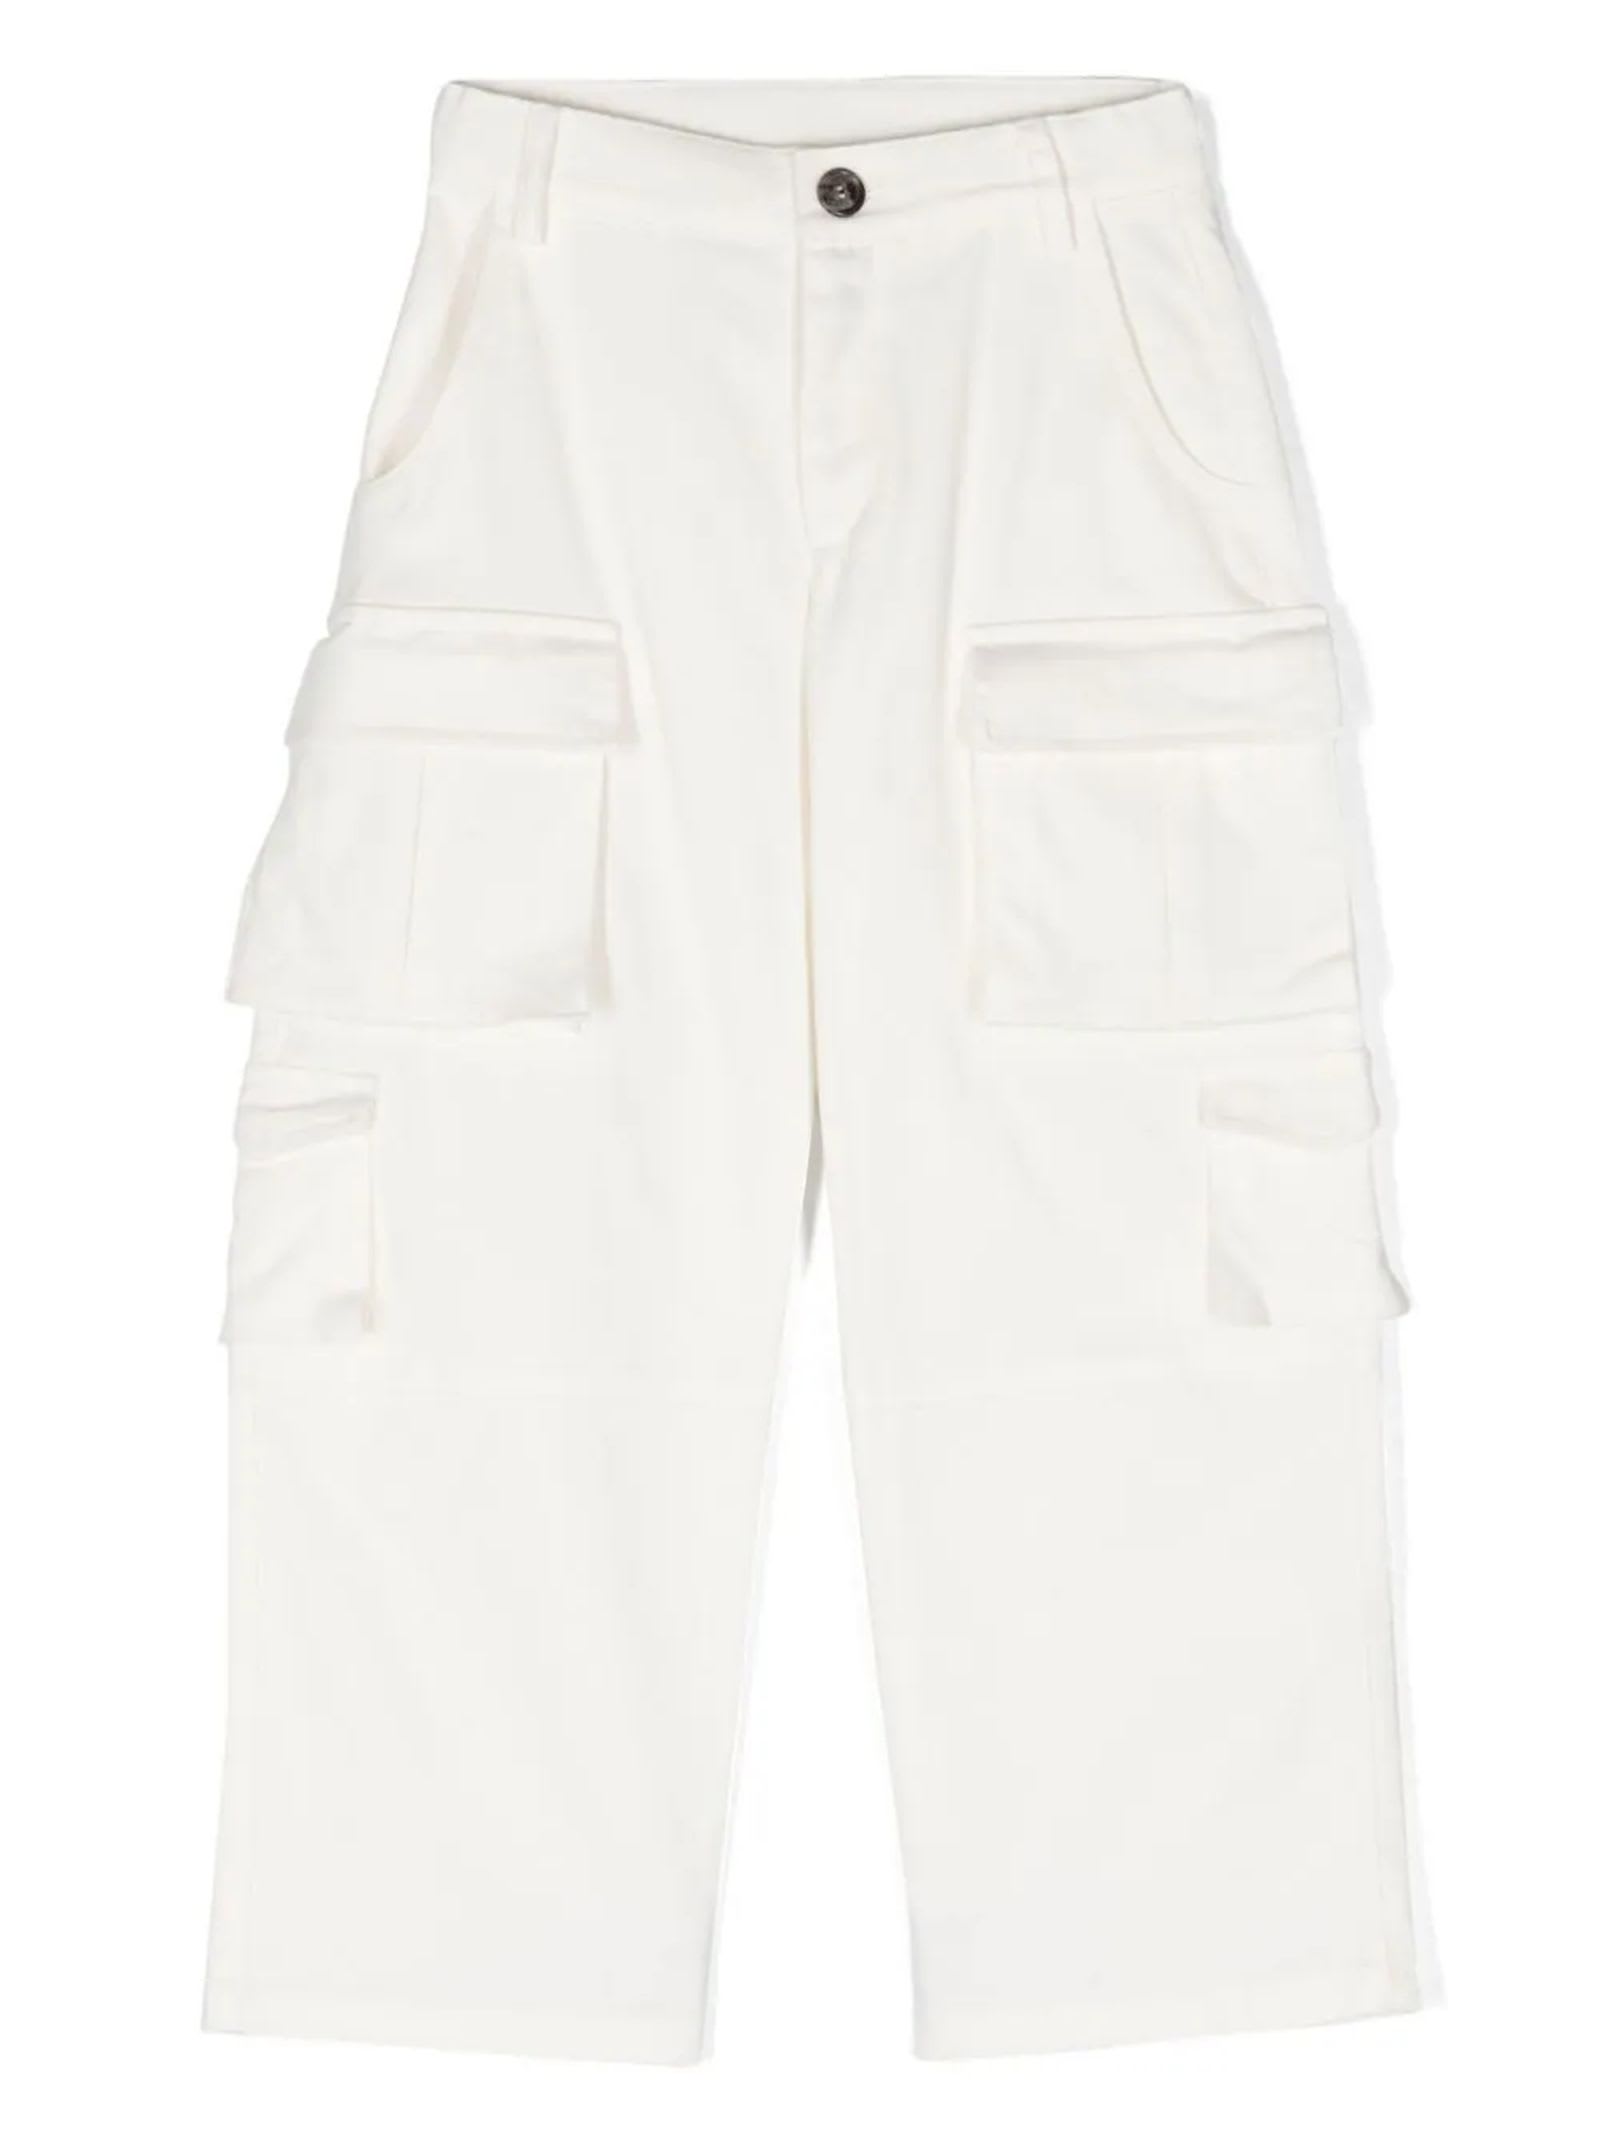 Shop Douuod Trousers White